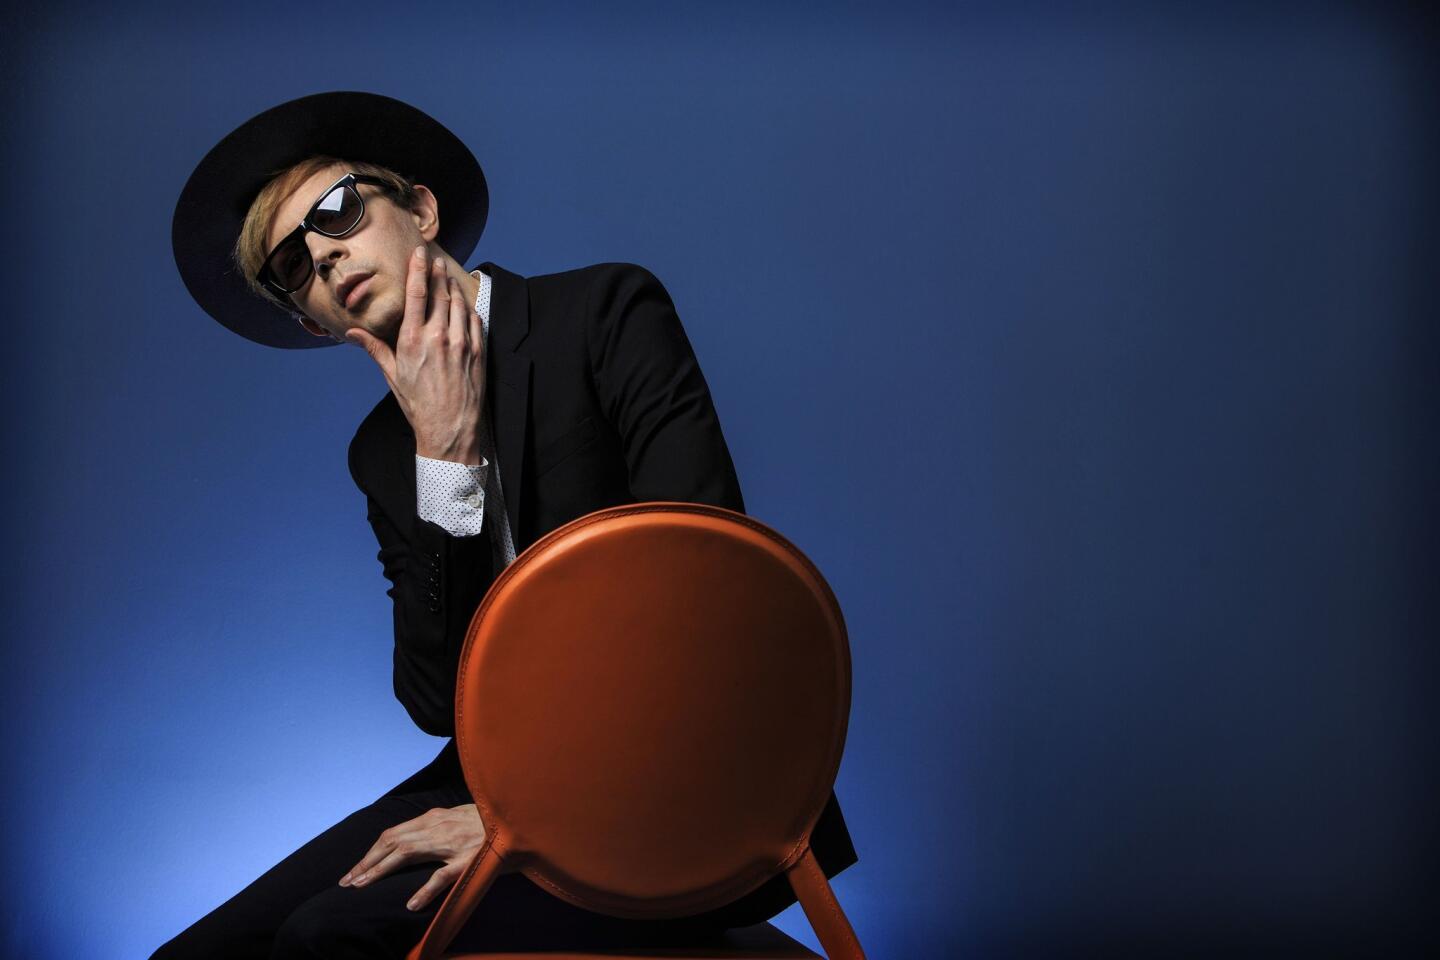 A record that continues to blossom six months after its release, Beck's breathtaking 12th studio album is a rush of California guitar pop with precisely honed melodies, inventive structures and surprising, yet logical, instrumental diversions.